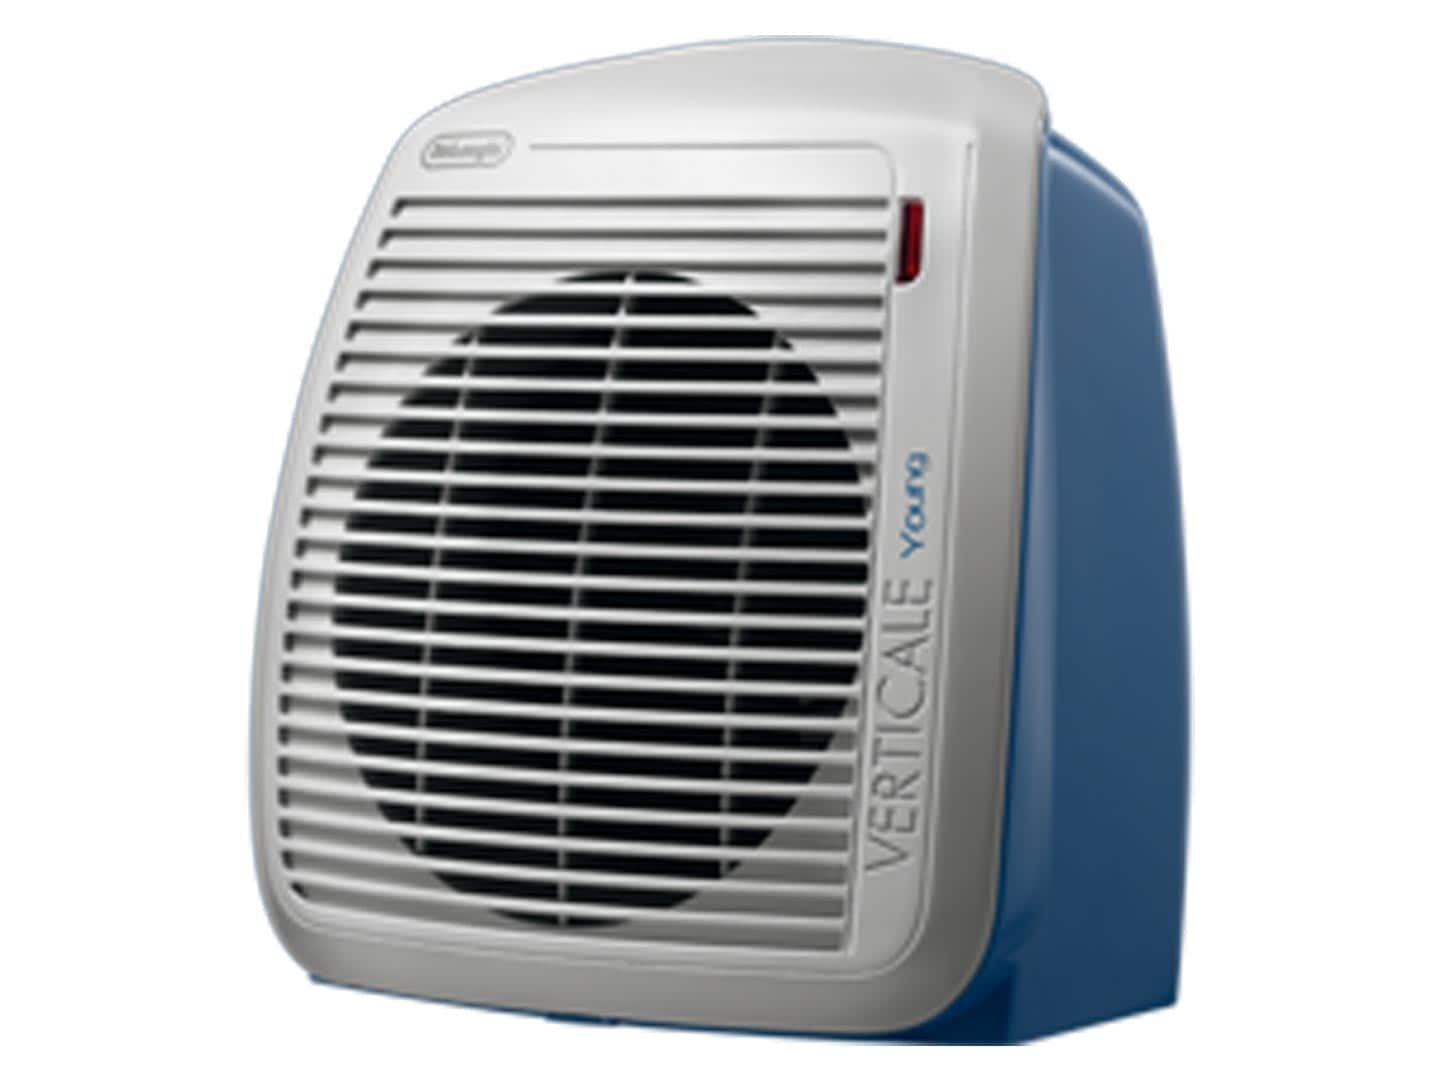 Verticale Young Compact Fan Heater Blue Hvy1030bl Delonghi Us throughout proportions 1440 X 1080